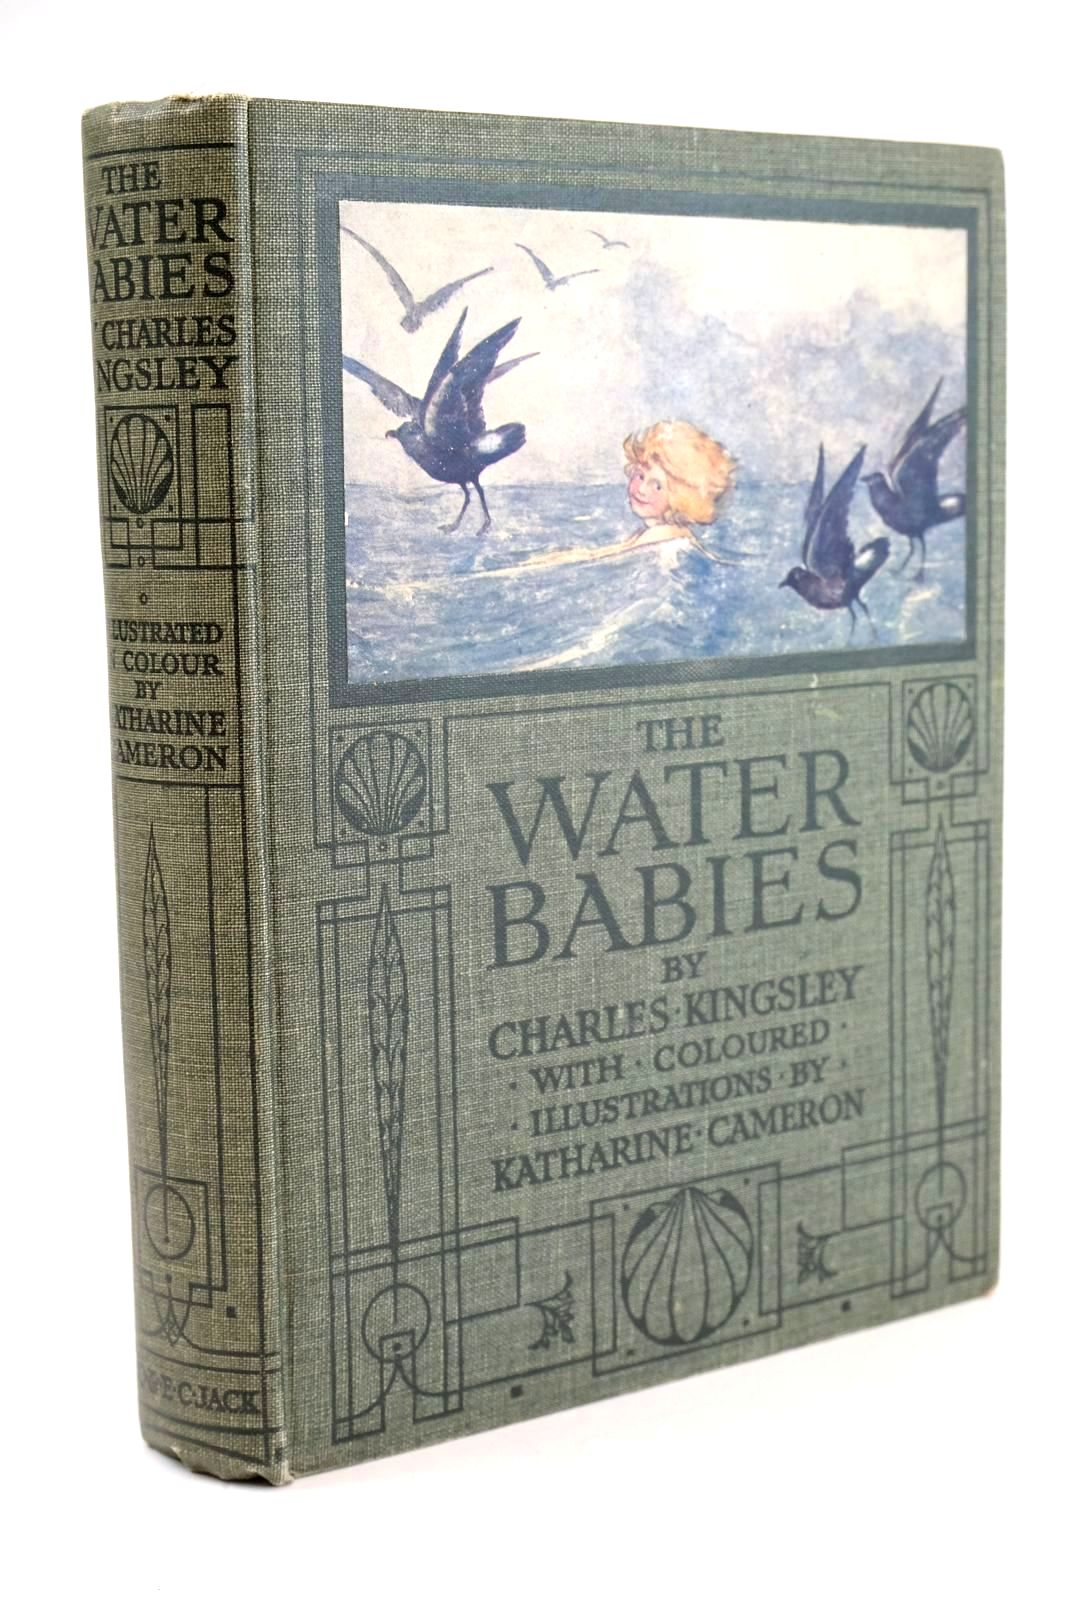 Photo of THE WATER BABIES written by Kingsley, Charles illustrated by Cameron, Katharine published by T.C. & E.C. Jack Ltd. (STOCK CODE: 1325017)  for sale by Stella & Rose's Books